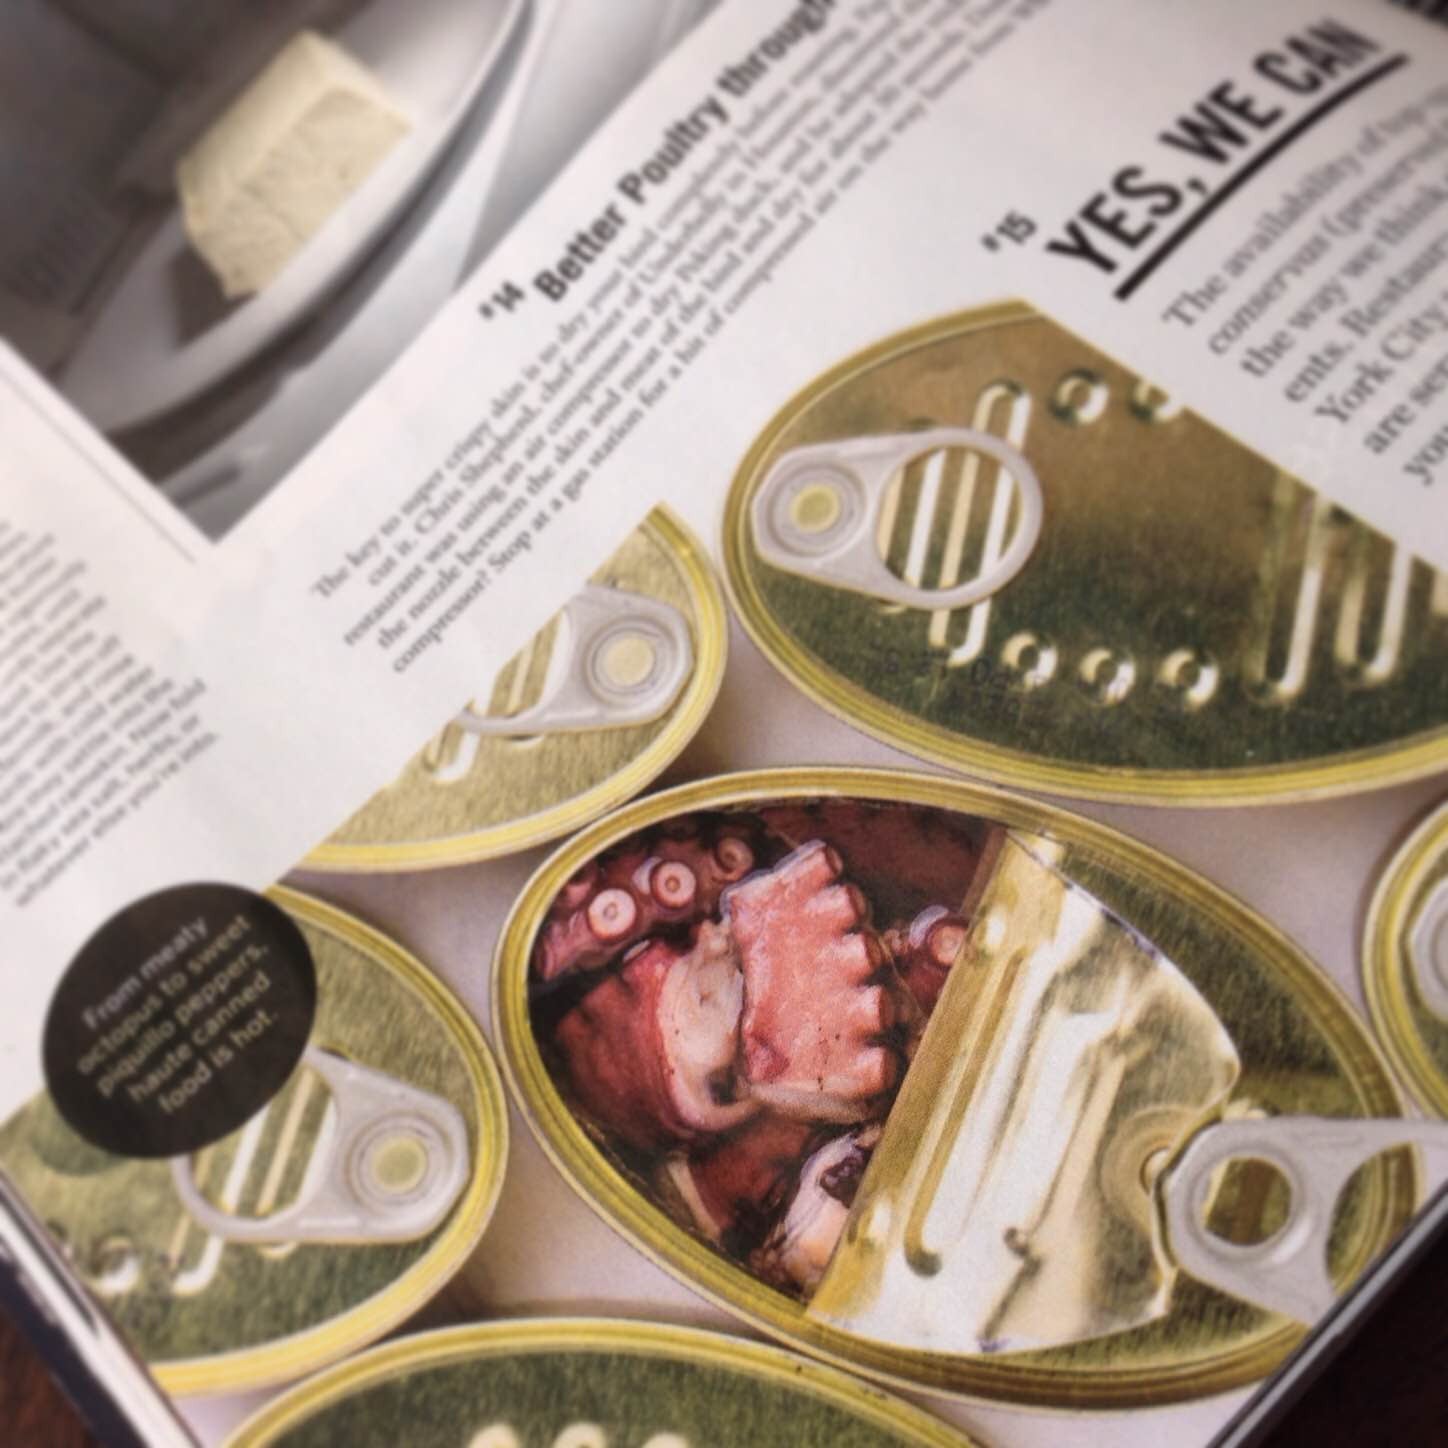 #15 on the Saveur 100 for 2015: Top-Quality Spanish Conservas